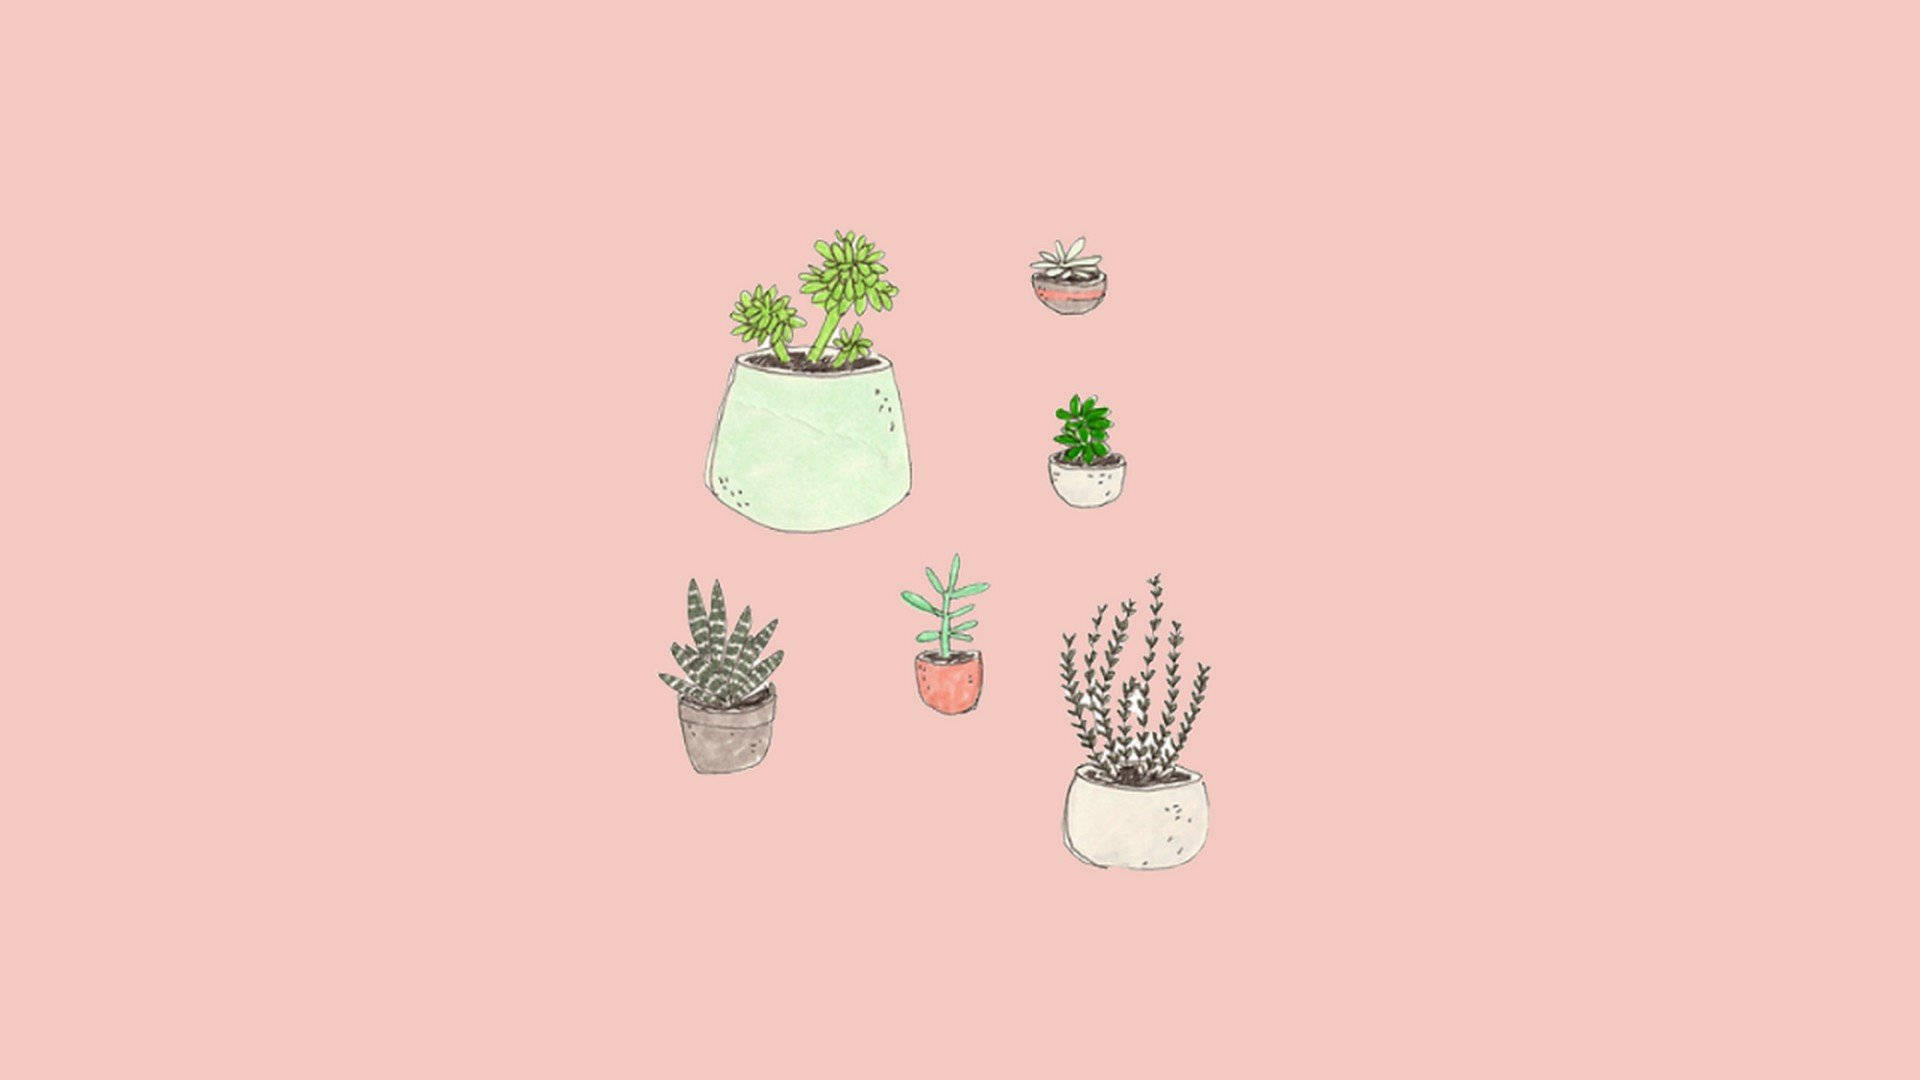 Embrace Tranquility - Lovely Potted Plant Collection In An Aesthetic Décor. Background